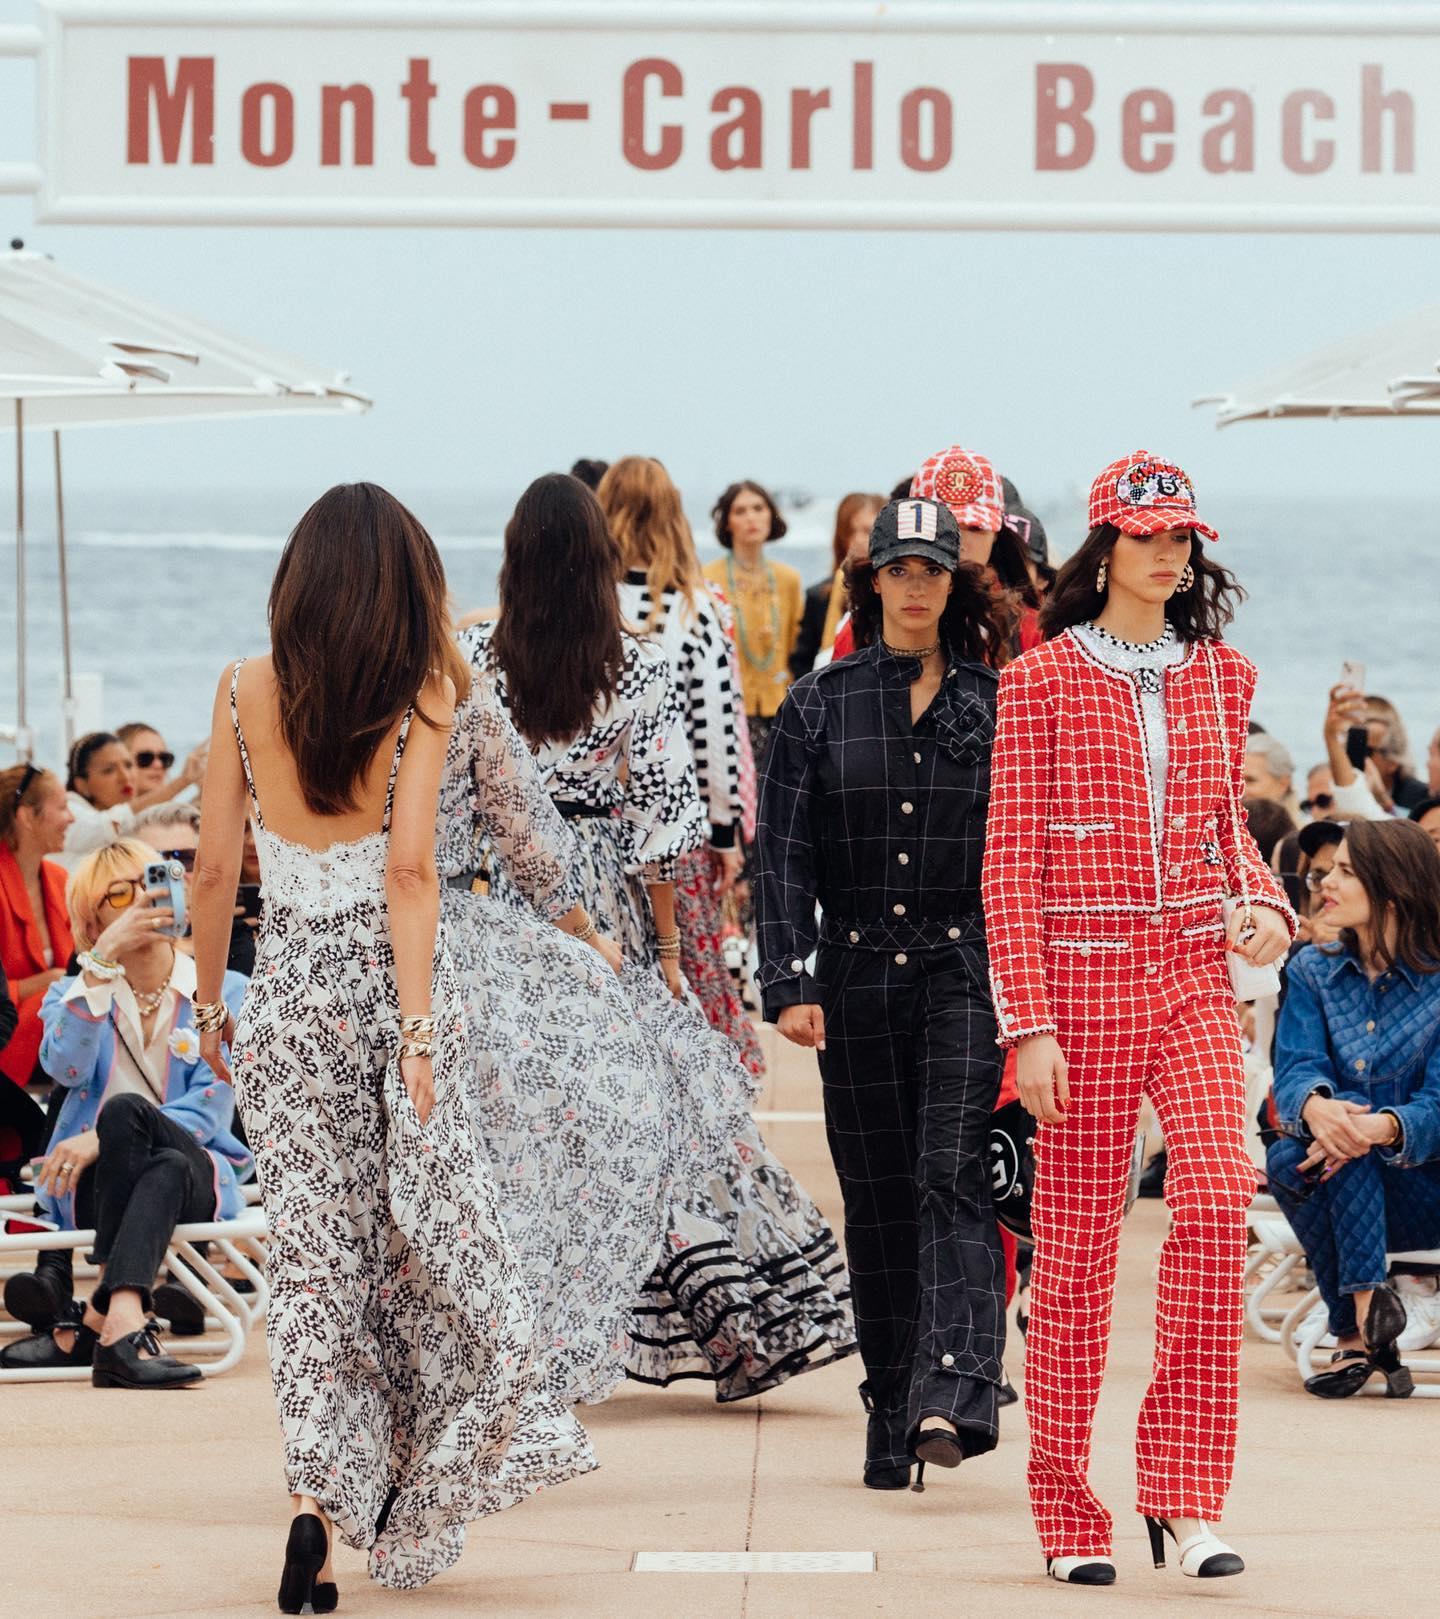 “Monaco is inherent to the history of CHANEL. We have lived many happy moments there.” Virginie Viard

#CHANELcruise 2022/23

#OfficialBespoke #Chanel #Fashion #Luxury #Monaco #cotedazur #France